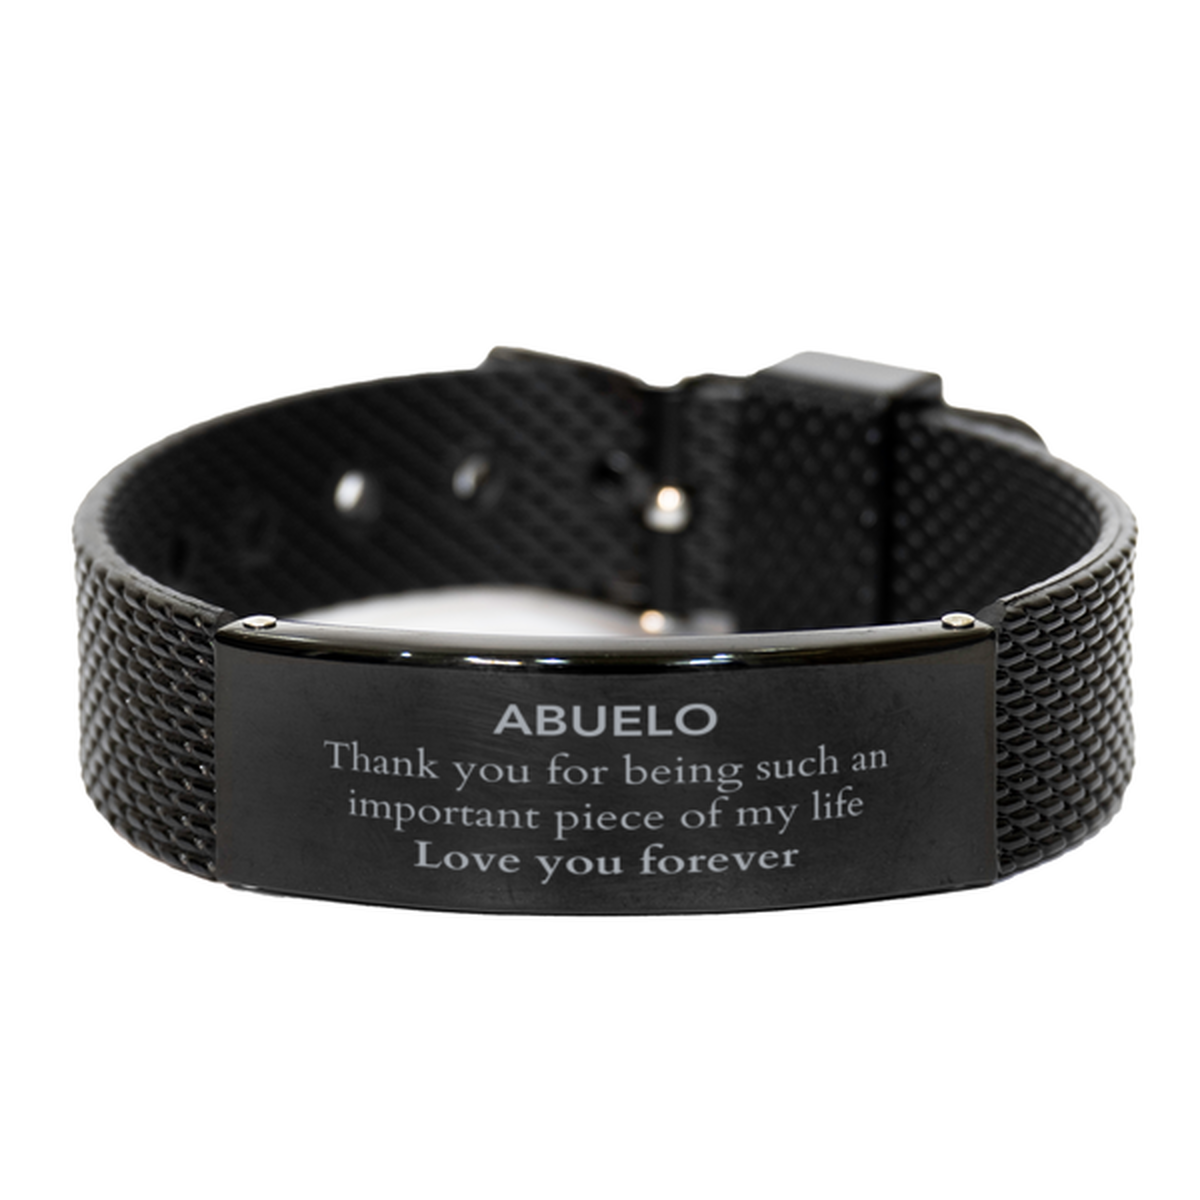 Appropriate Abuelo Black Shark Mesh Bracelet Epic Birthday Gifts for Abuelo Thank you for being such an important piece of my life Abuelo Christmas Mothers Fathers Day